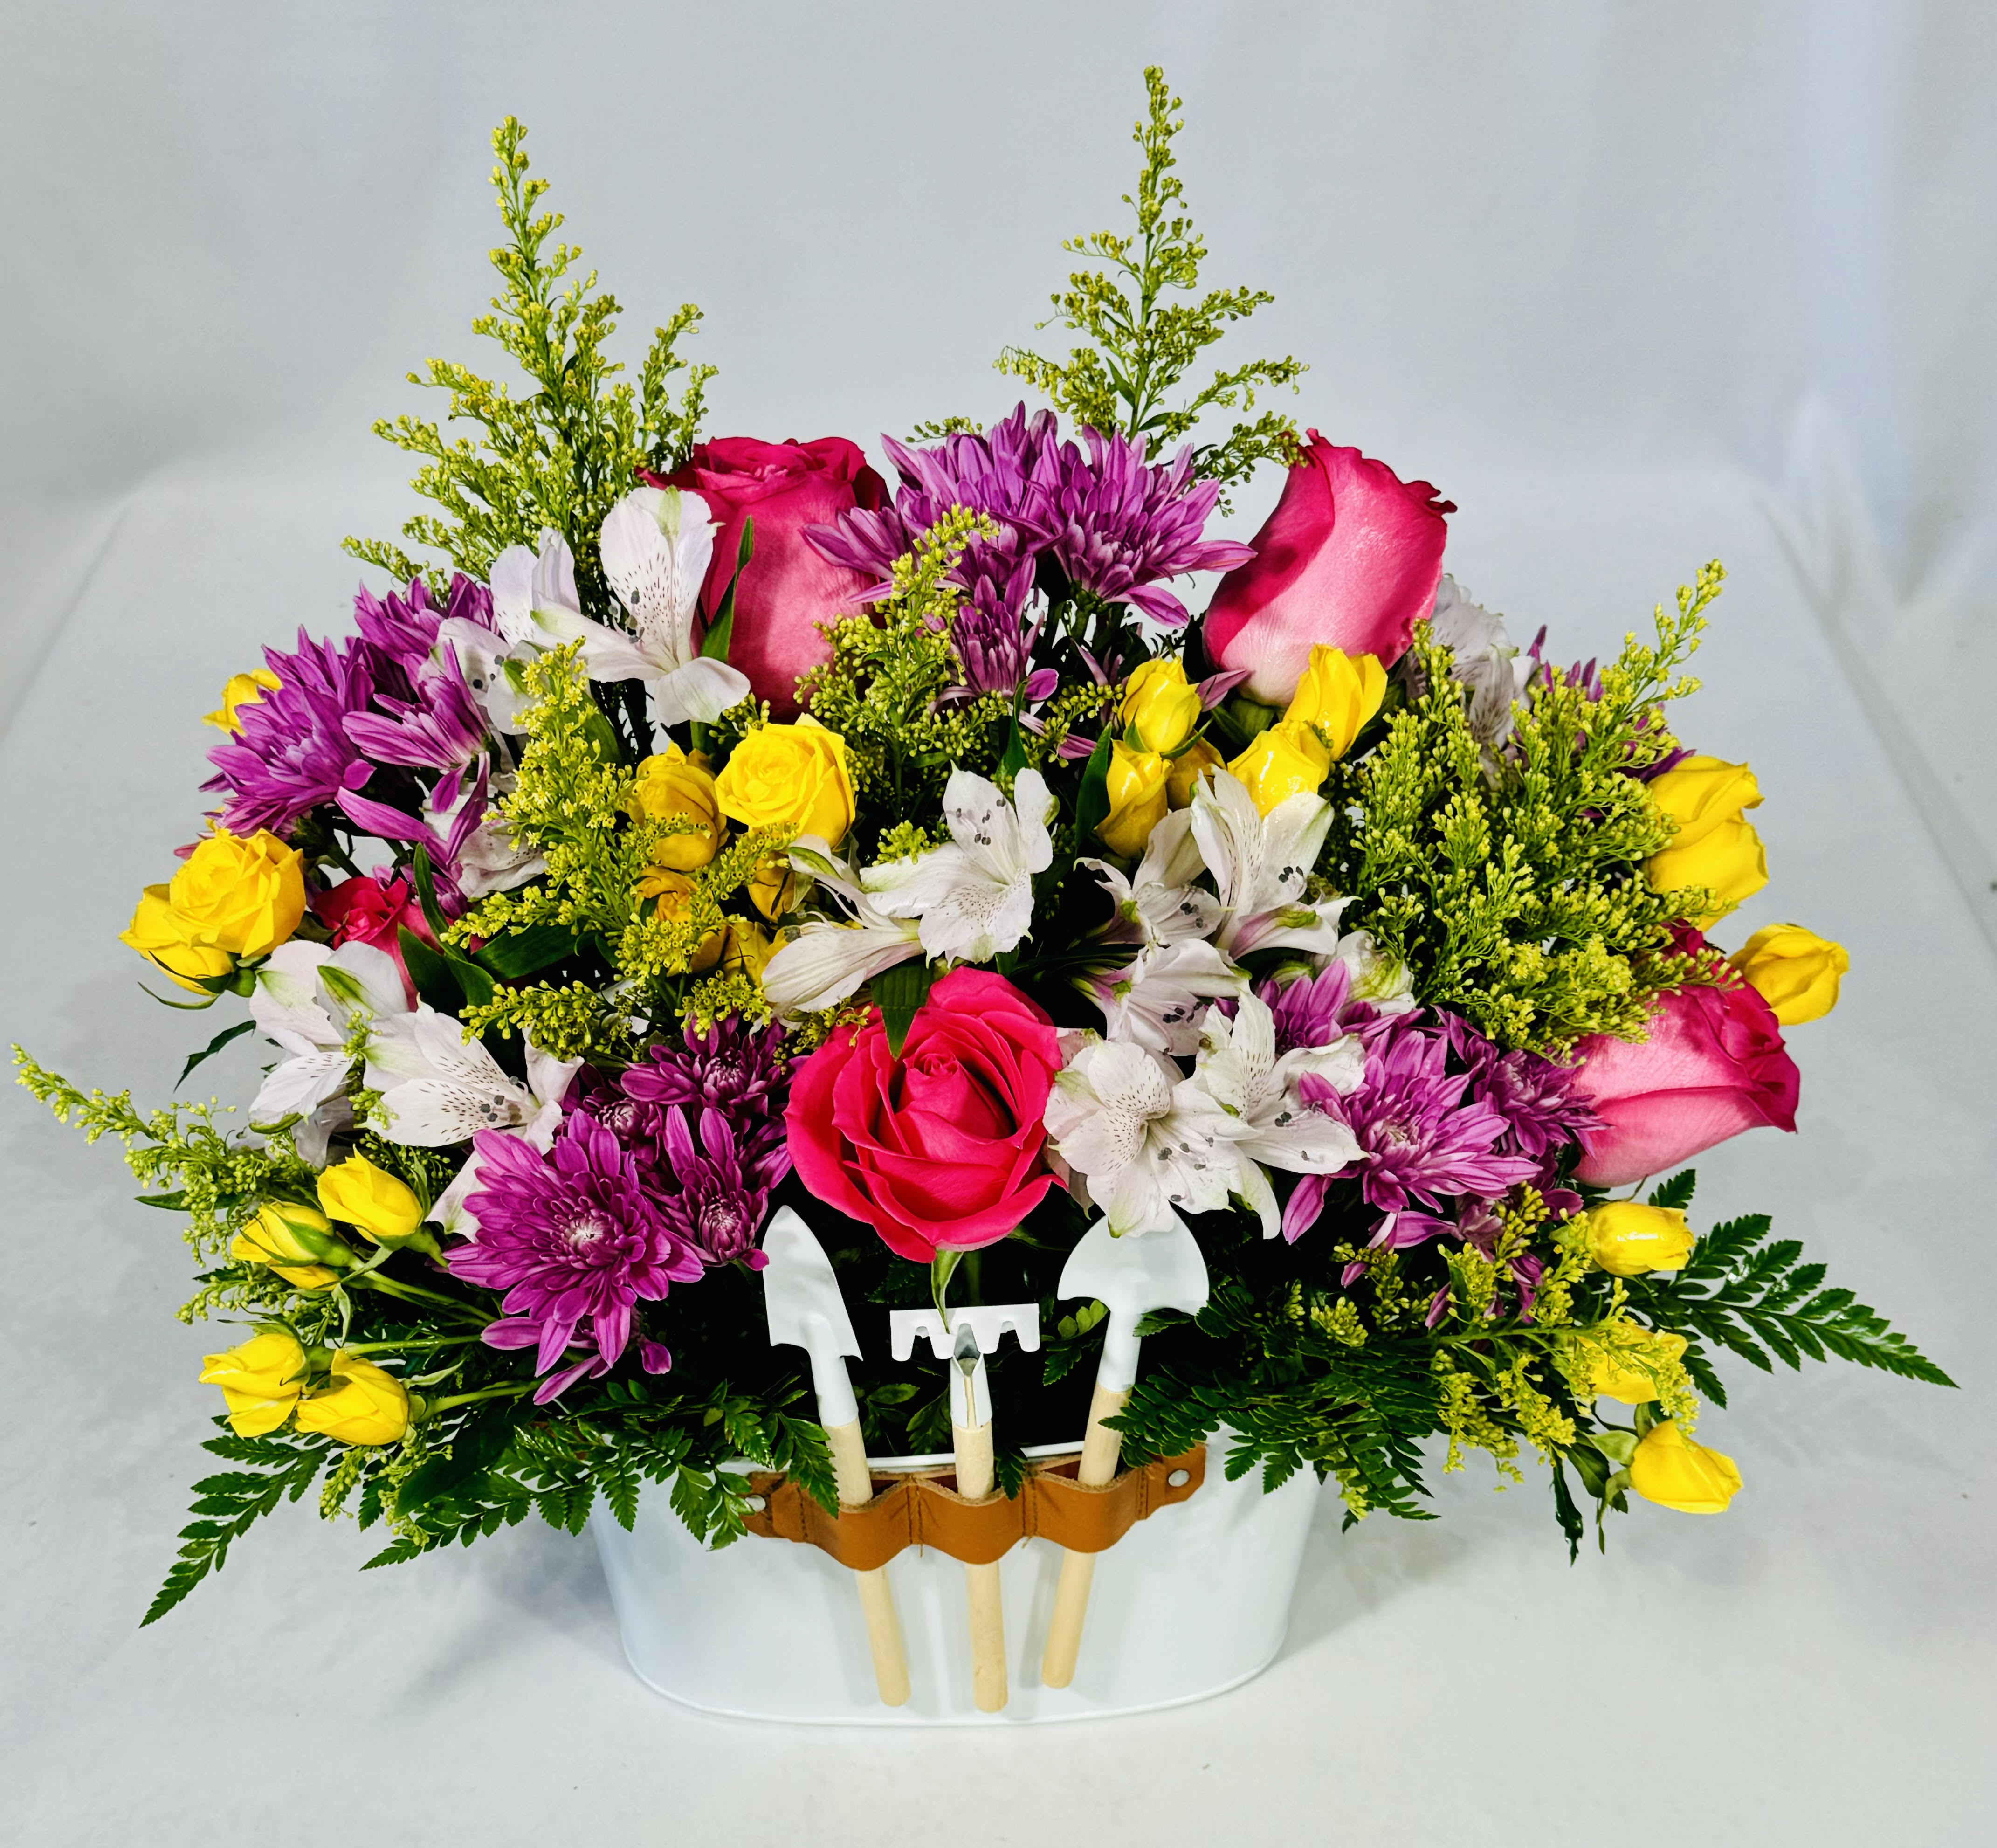 Summer Day Flower Garden - Summer Day Flower Garden comes adorned with Hot Pink Roses, Purple Daisies, White Alstroemeria, Yellow Sweetheart Roses and Solidago. All complete with a 3 pc. coordinating mini tool set and reusable pail. Wonderful floral arrangement sure to brighten someone's day. Perfect for any occasion. 12&quot; H